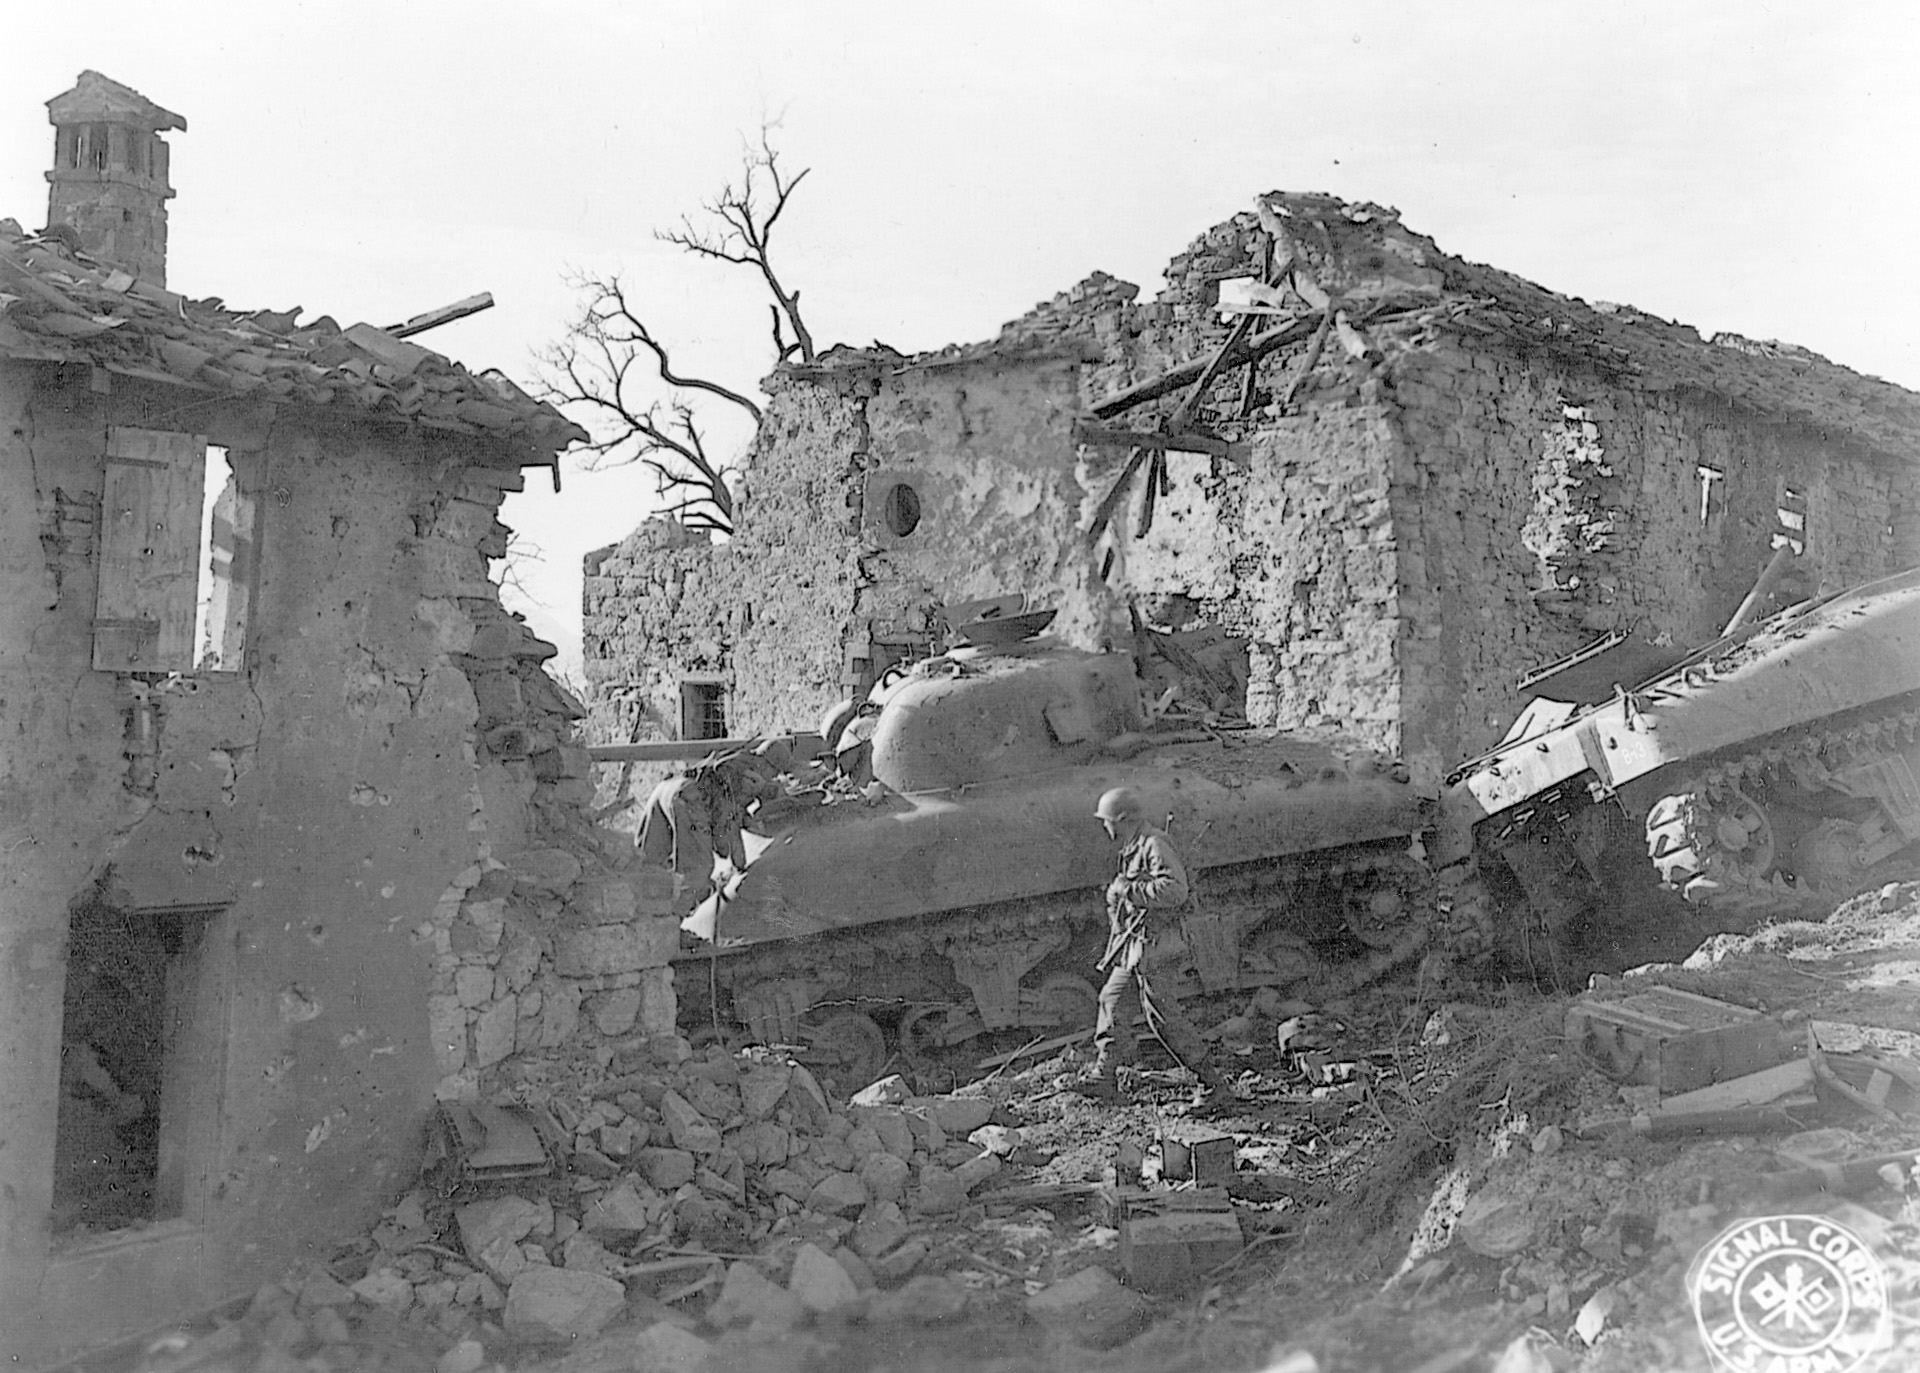 On February 20, 1945, the 87th Regiment of the 10th Mountain Division occupied the town of Corona below Monte Belvedere. 